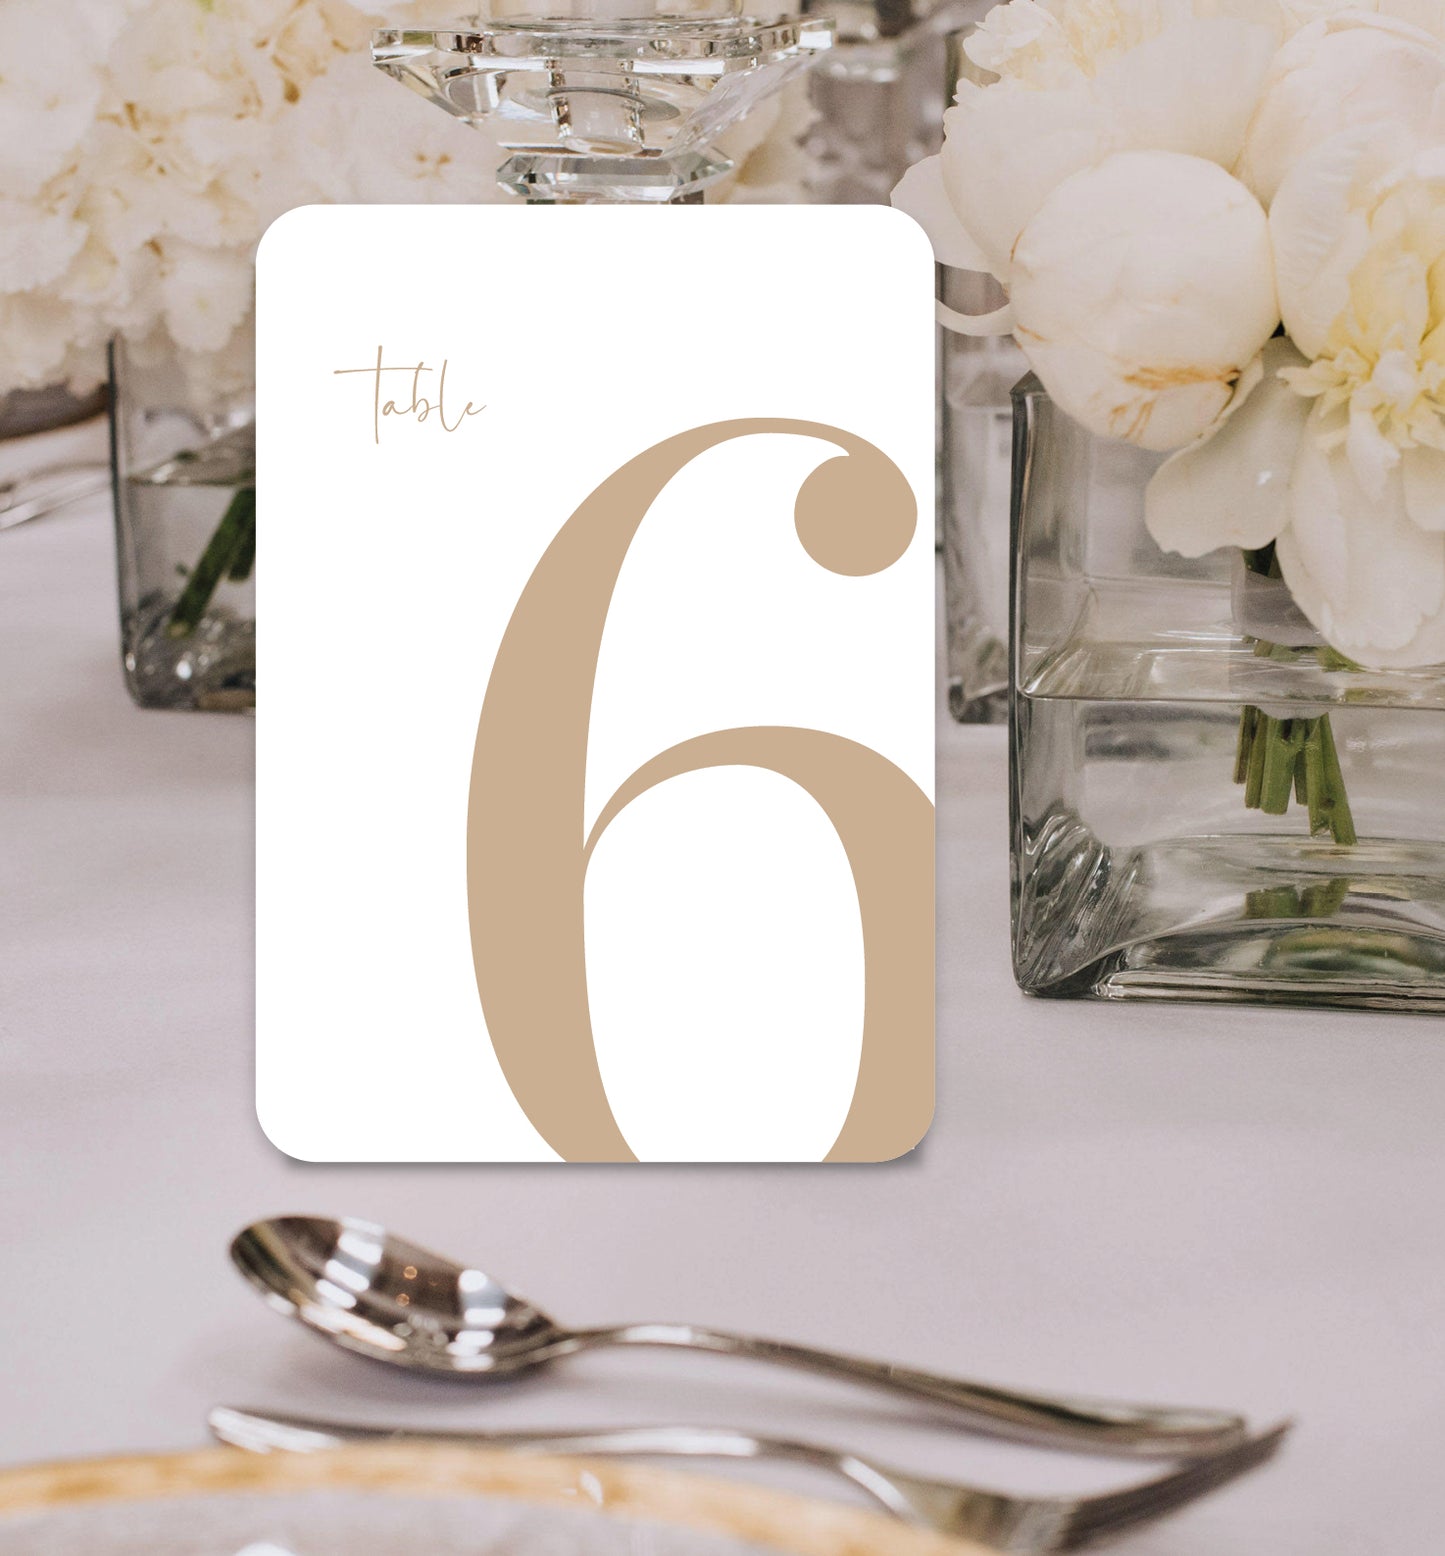 IVY LUXE TABLE NUMBERS